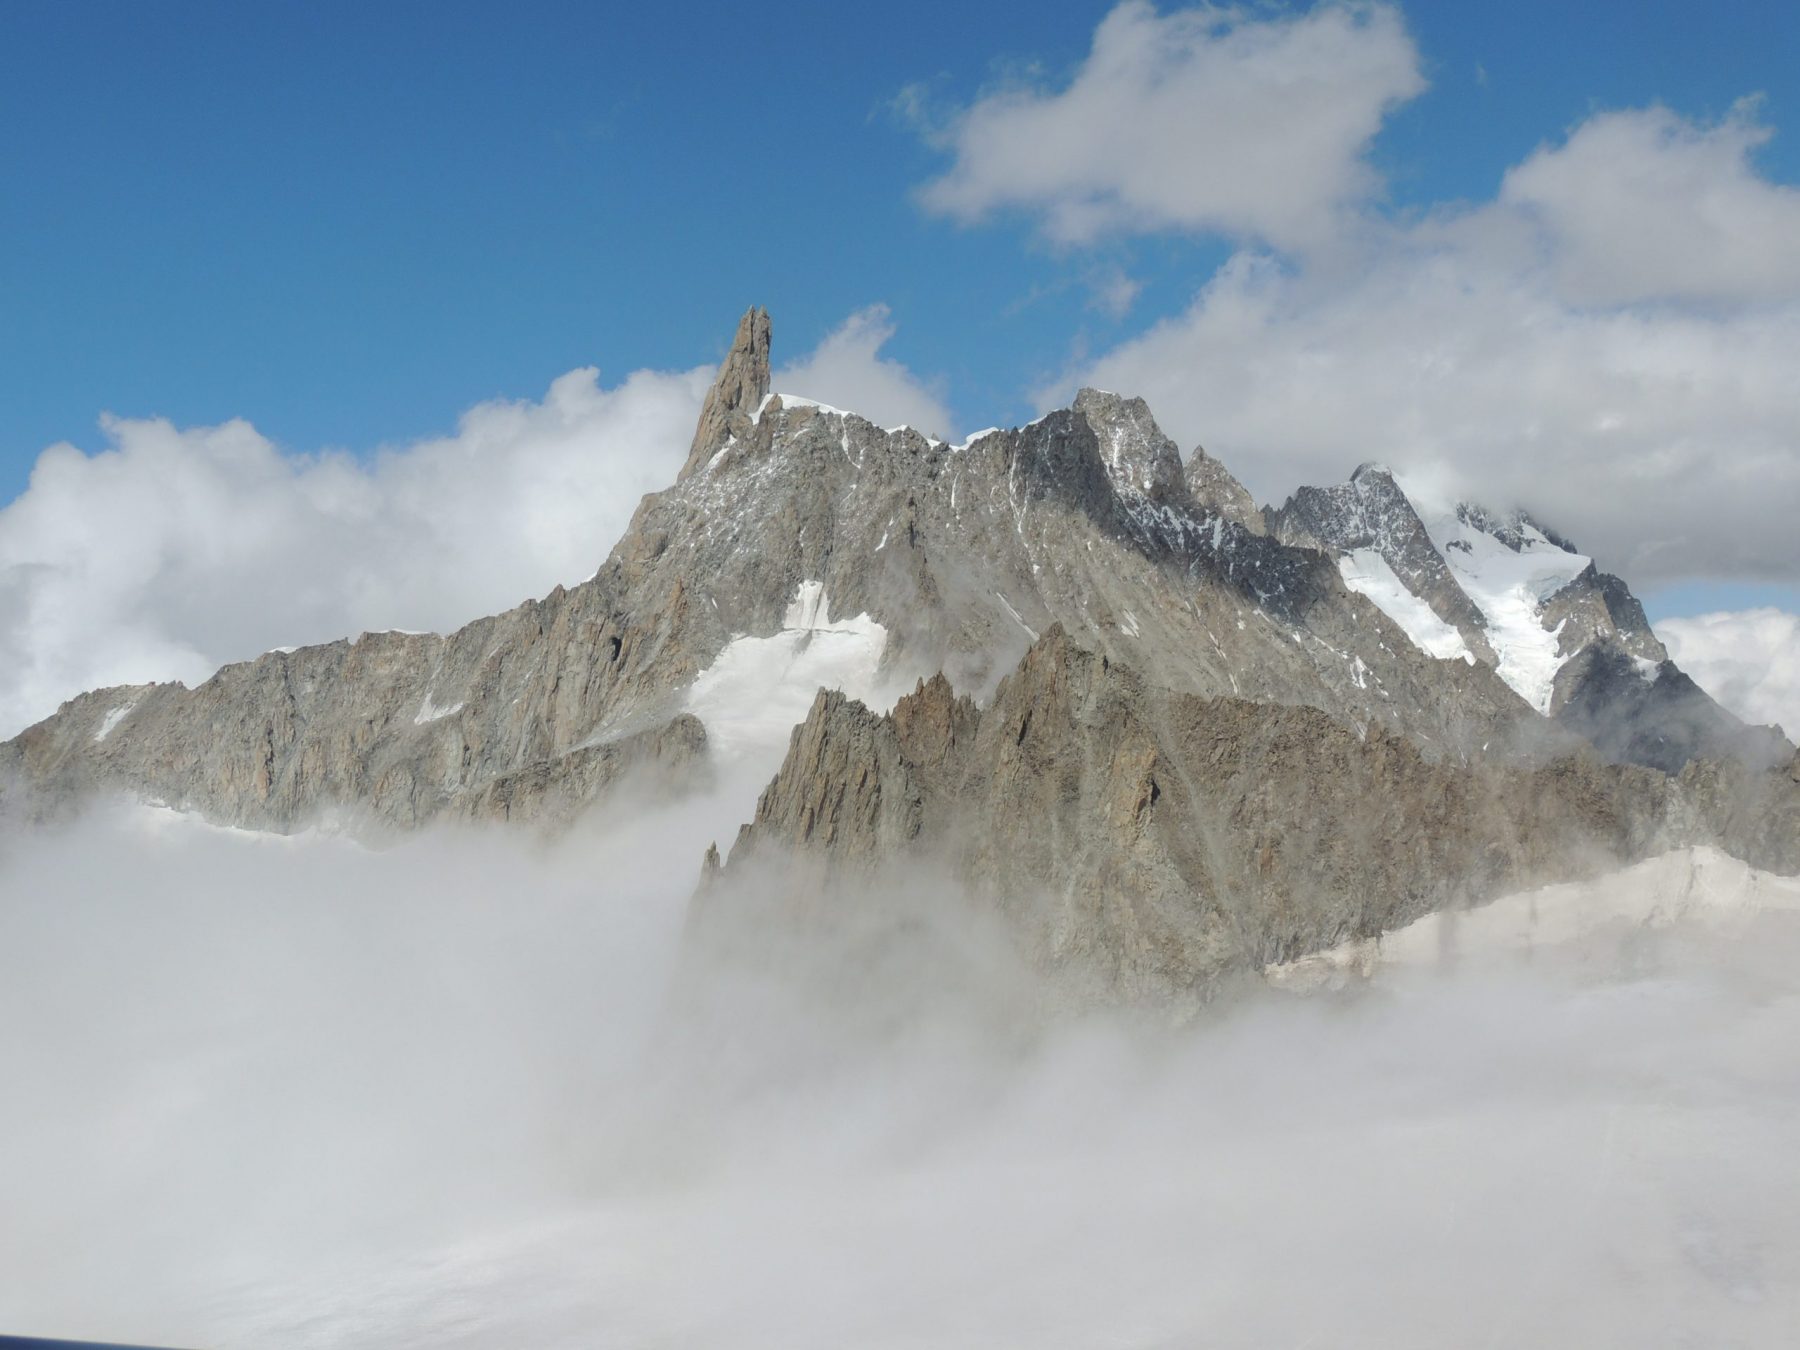 The Dent de Géant between the clouds, I took this photo from the top of Punta Helbronner. Aiguille du Midi vs Punta Helbronner – which one you should do?